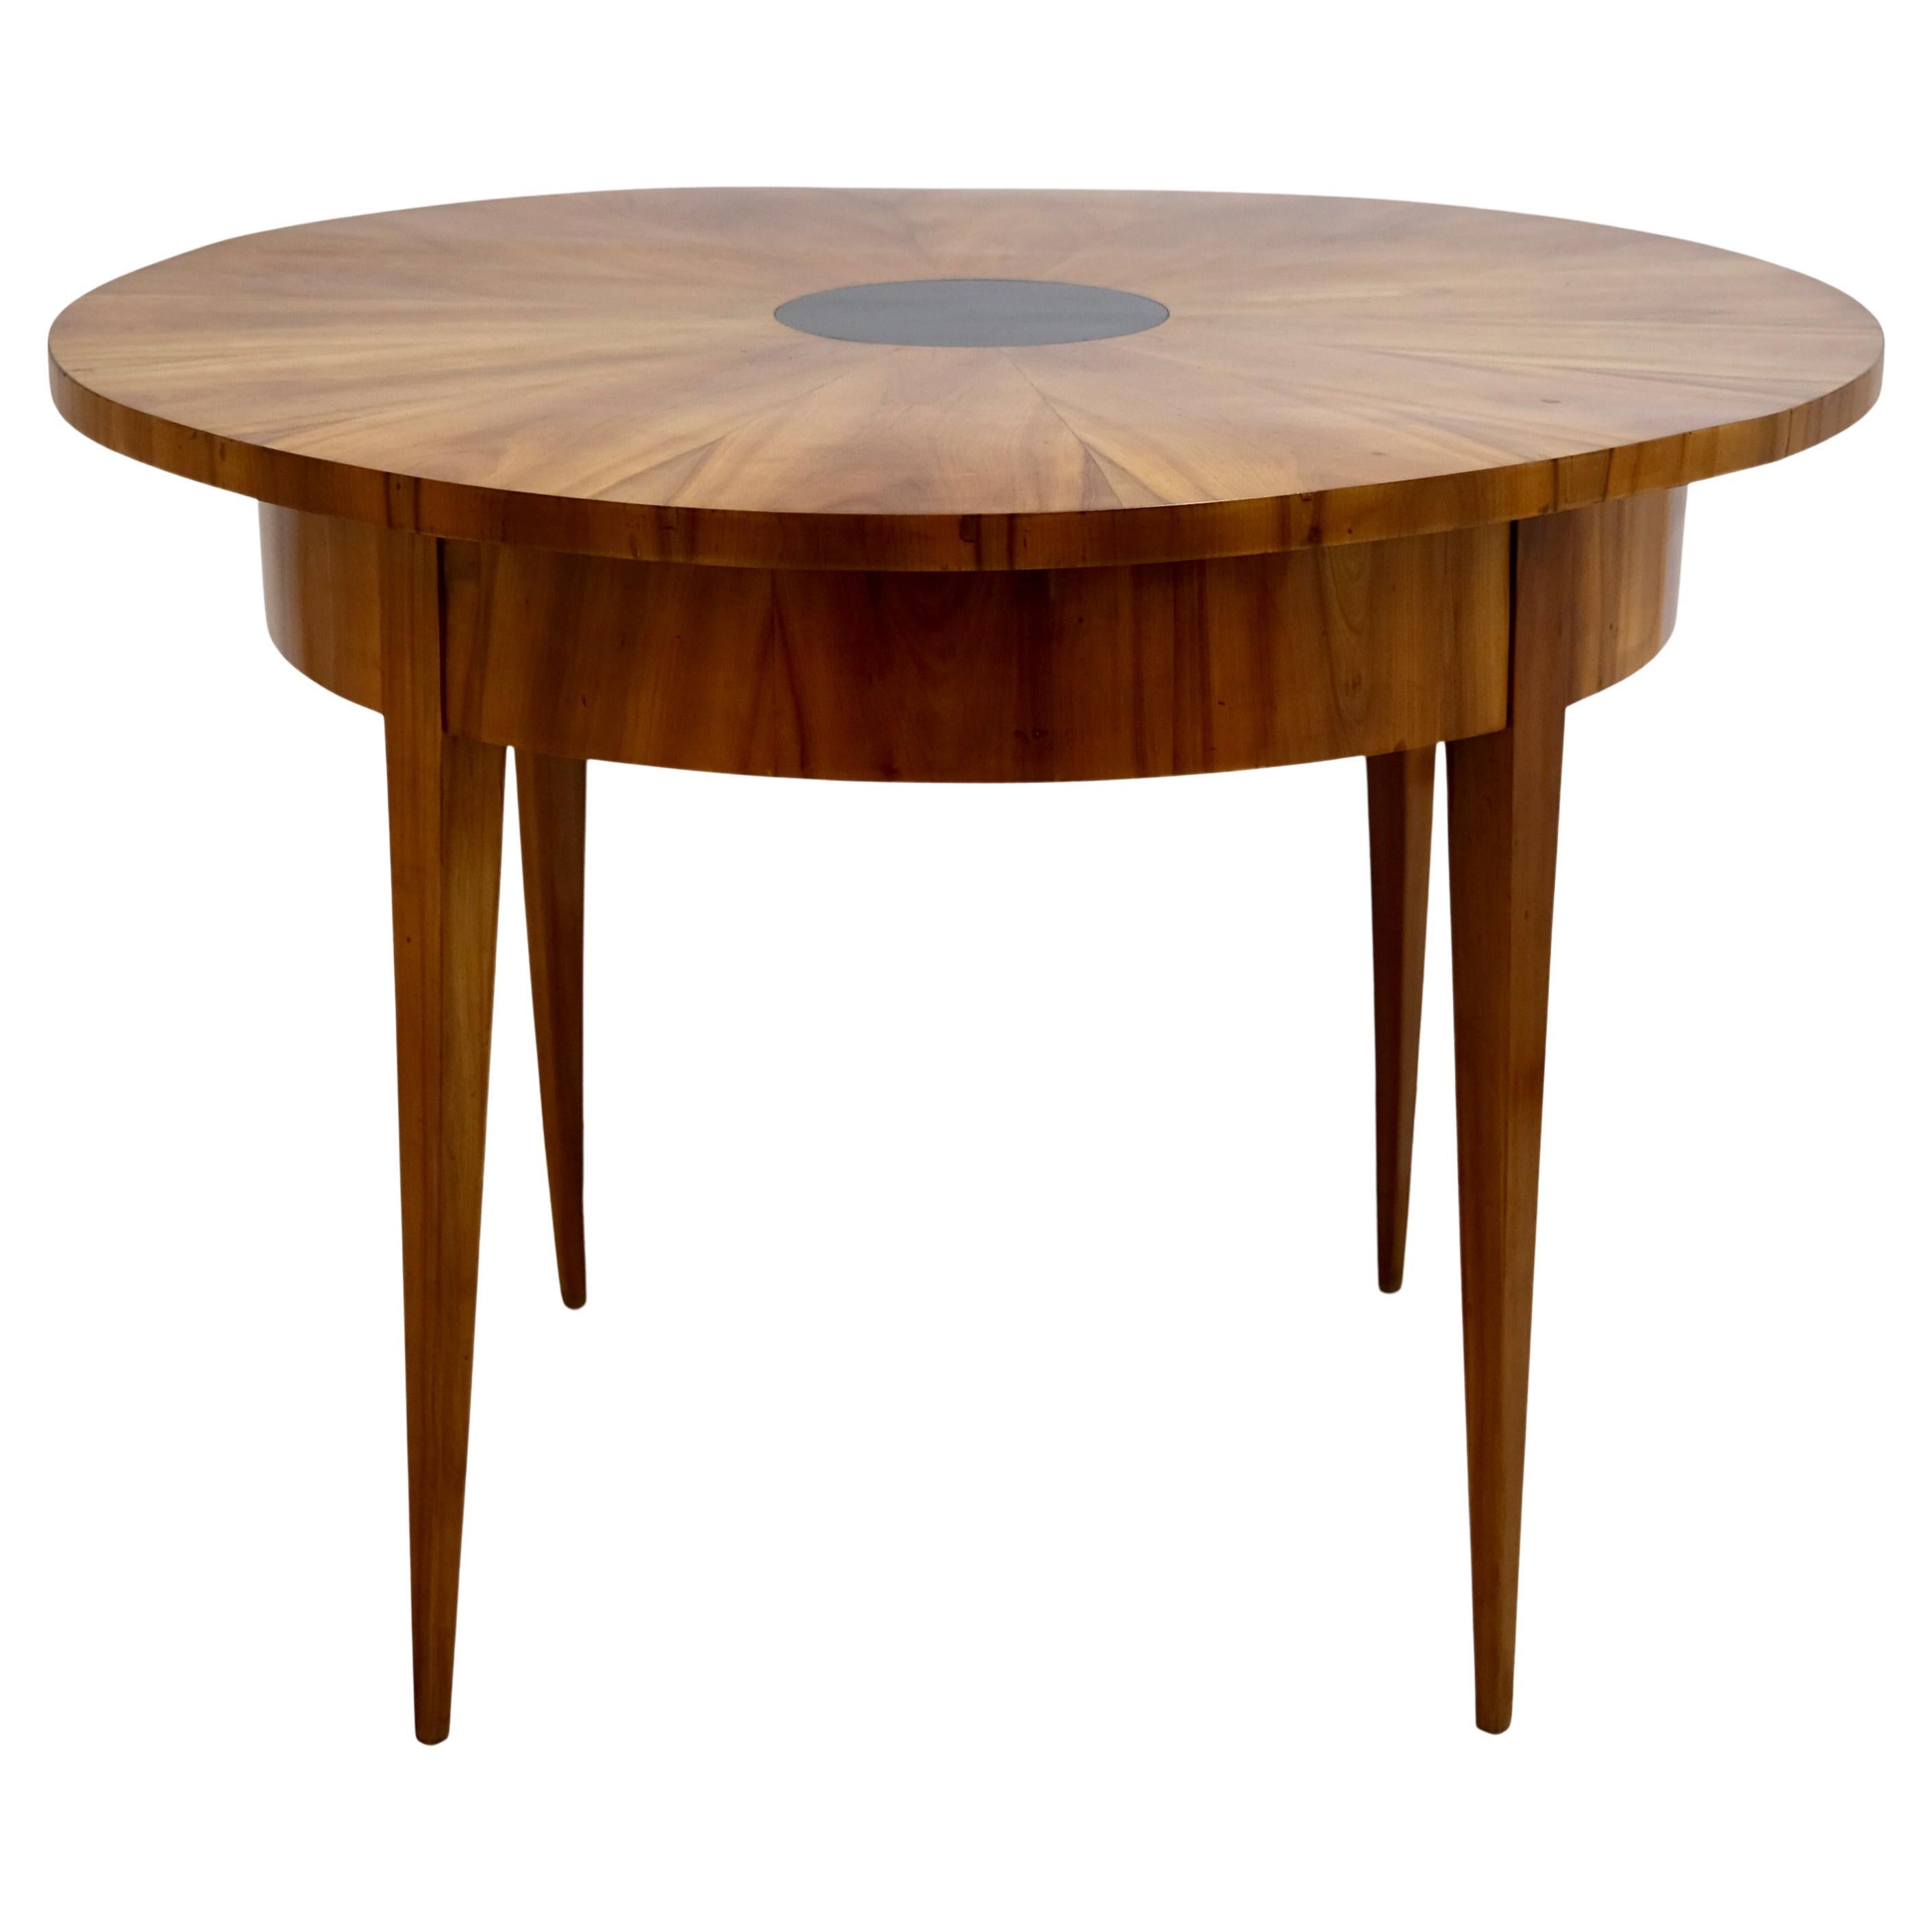 Round Biedermeier Dining Table or Center Table in Cherrywood Germany 1820's